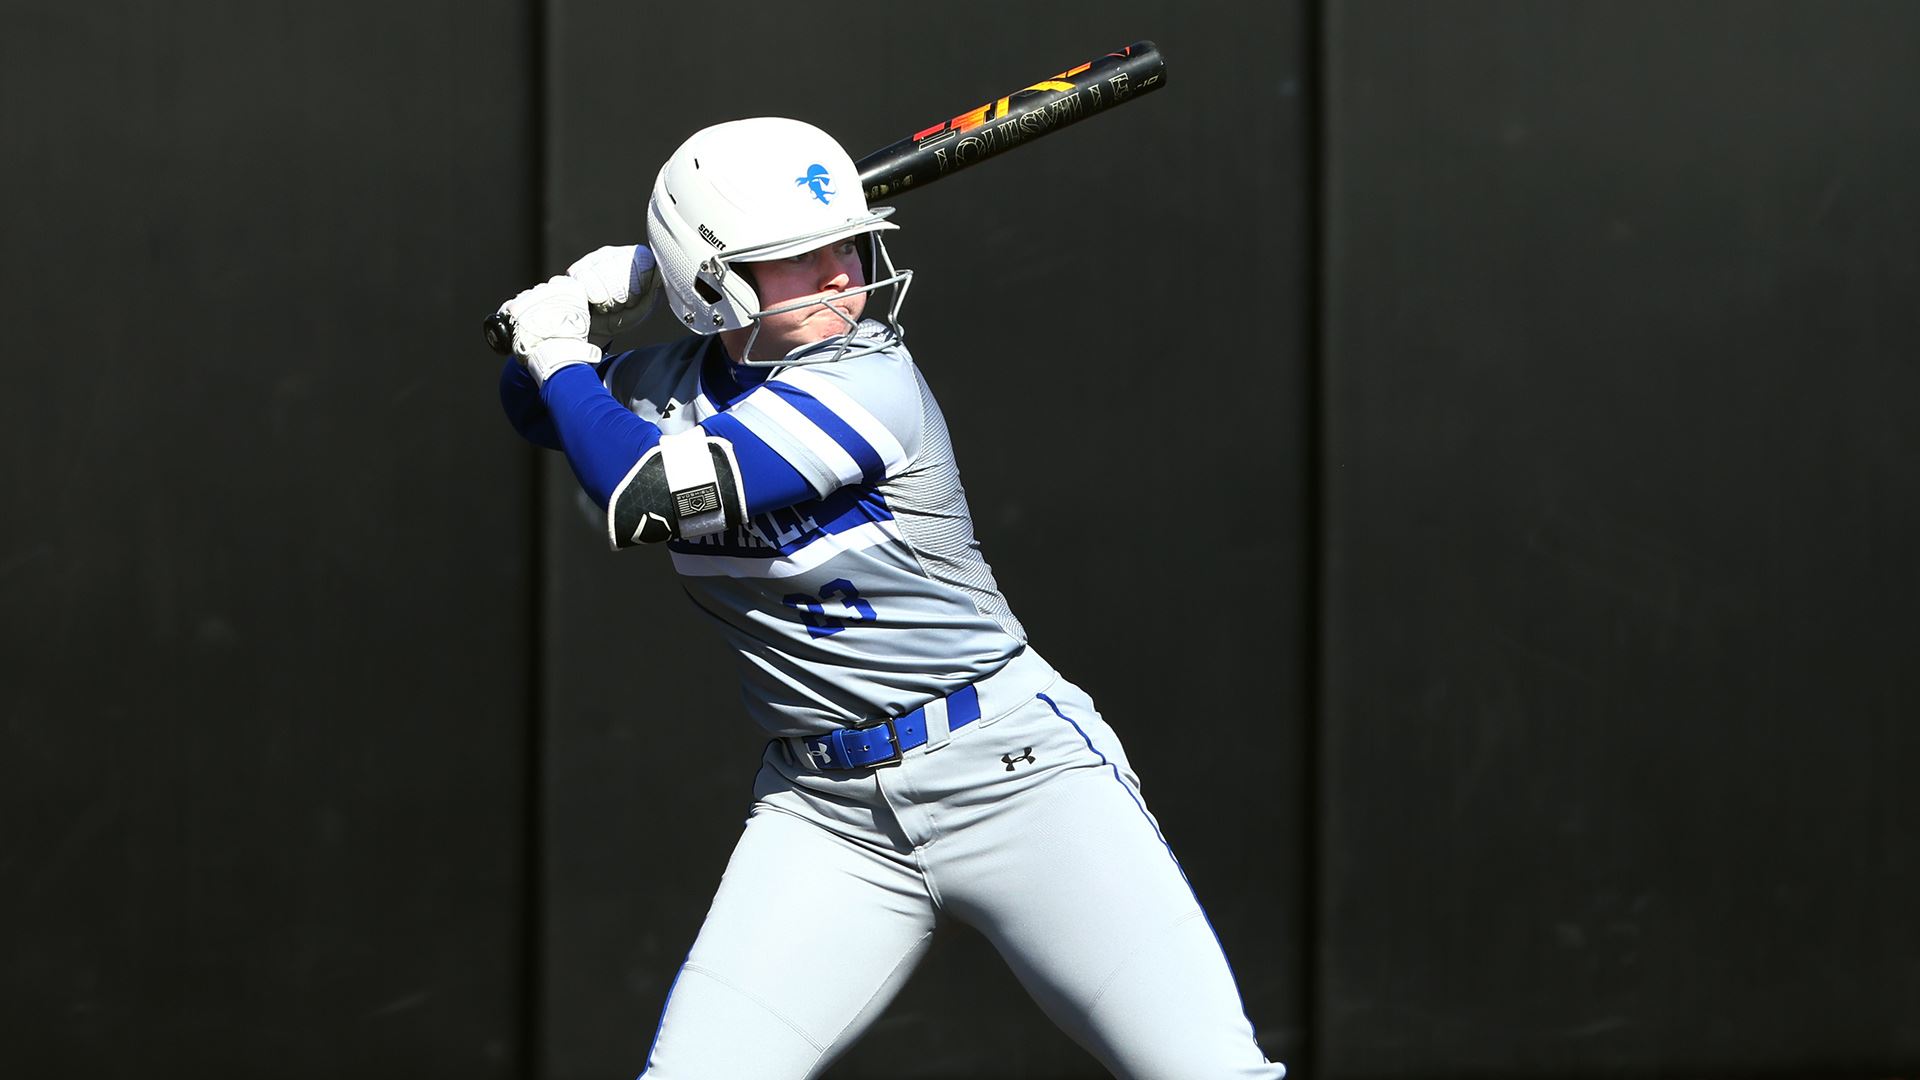 A Seton Hall softball player looks to bat on offense during a game.